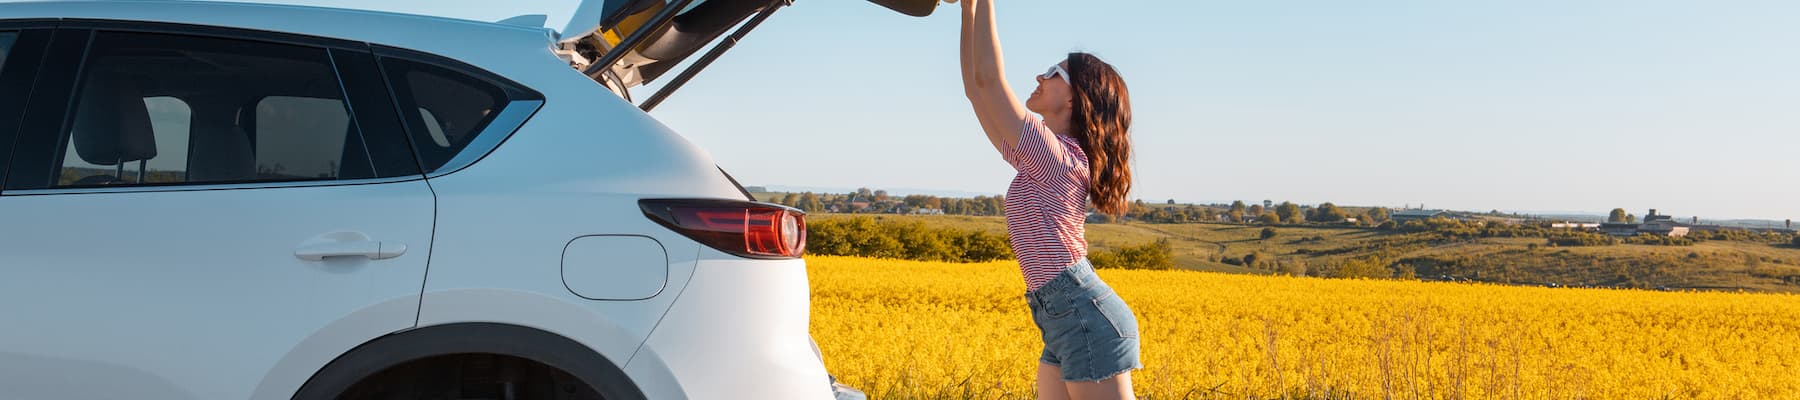 woman closing boot of white SUV parked in field